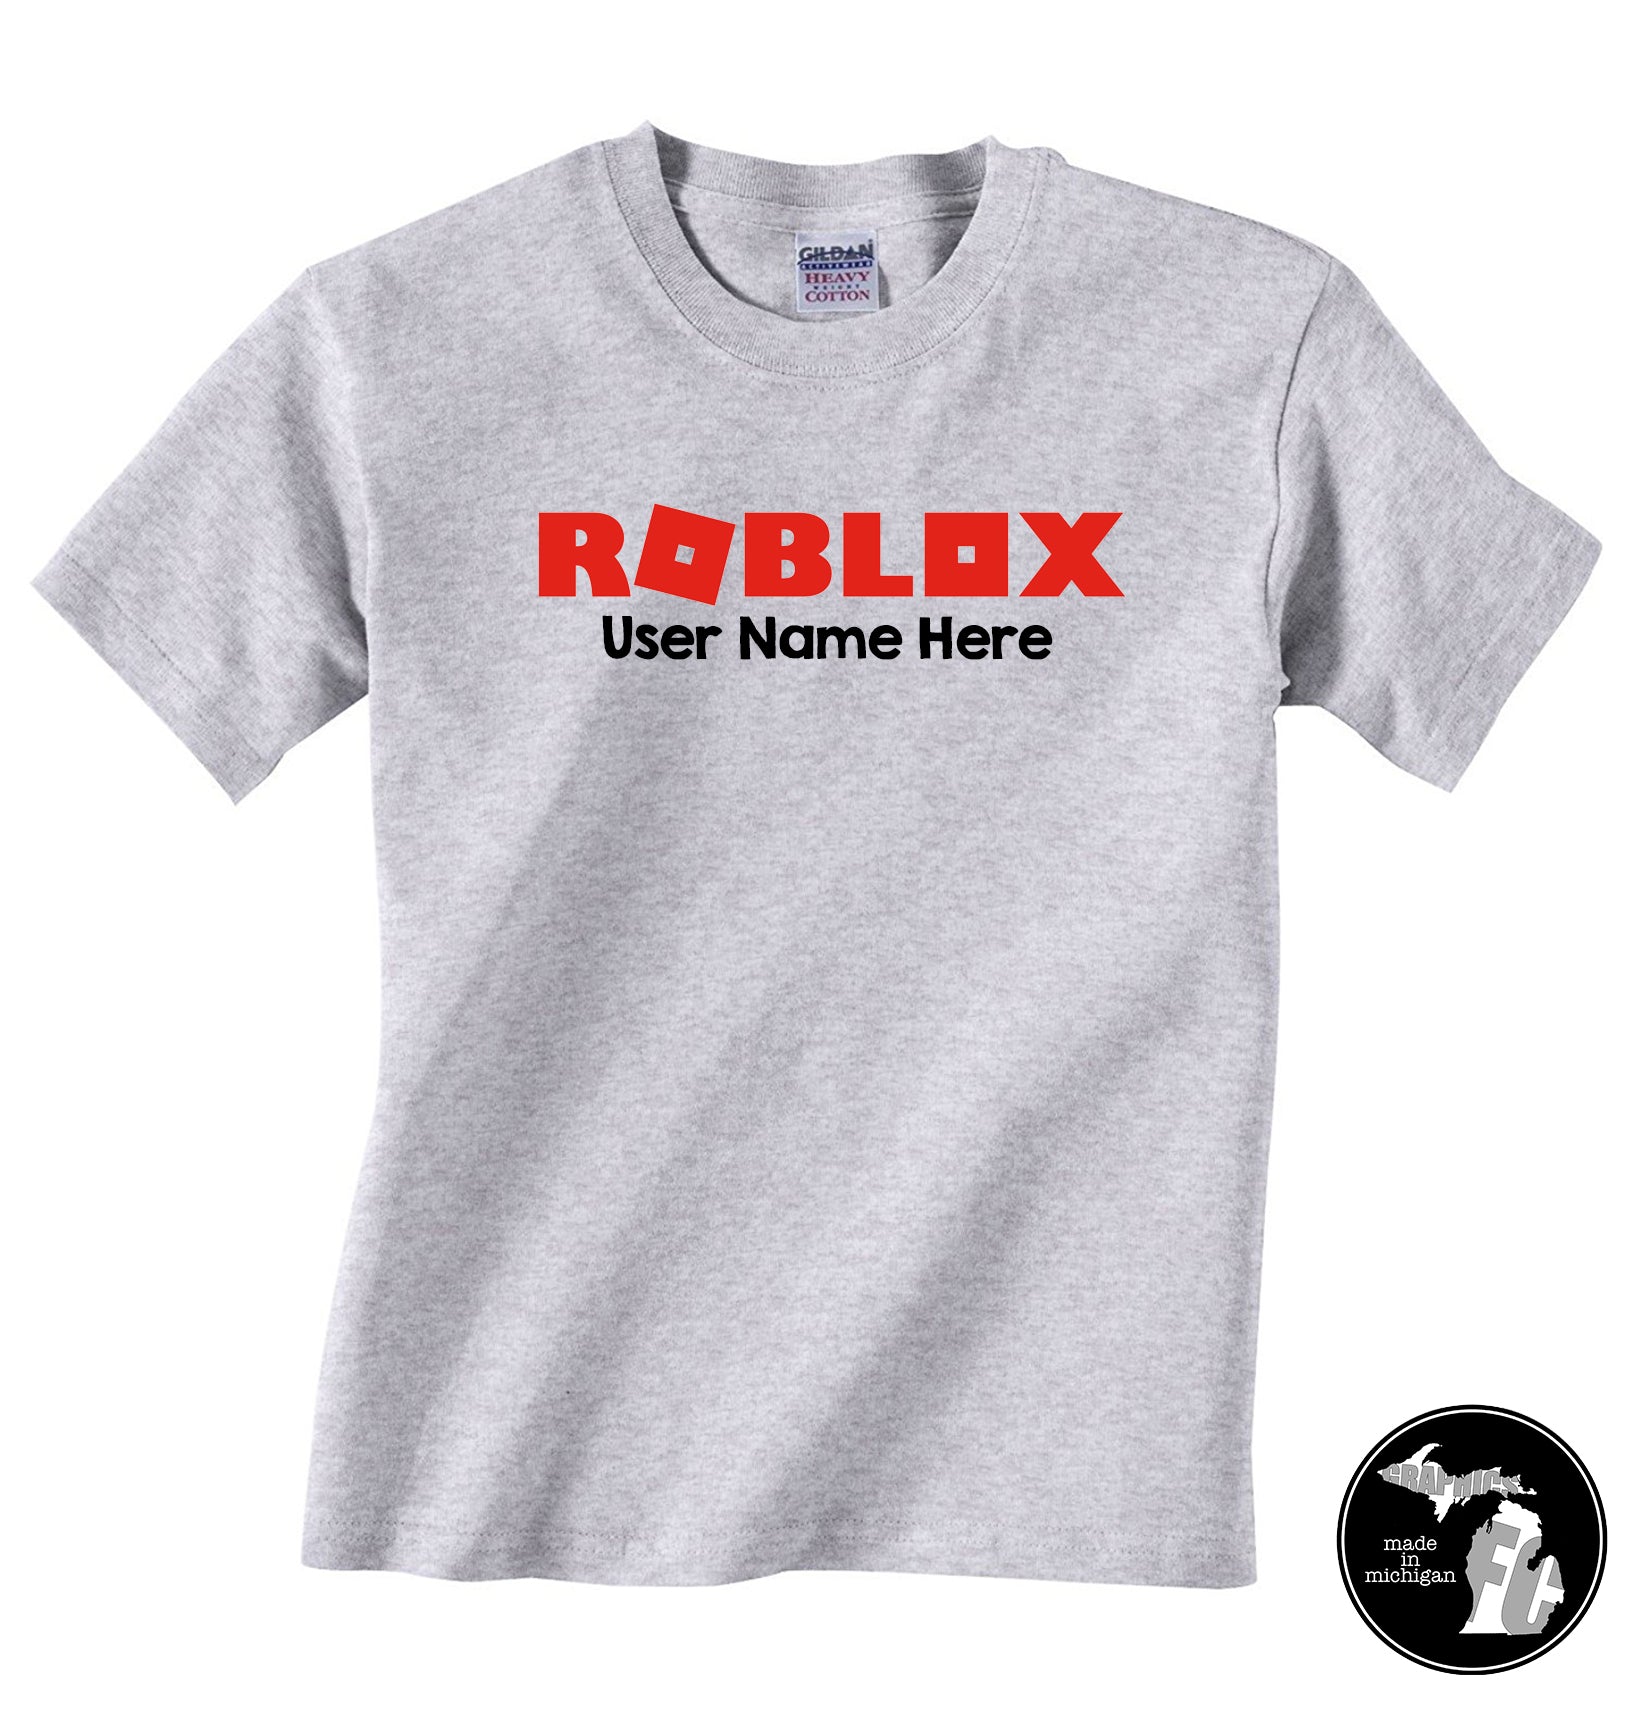 Roblox T Shirt With Personal User Name Kids Shirt Child Adults Furniture City Graphics - images of roblox t shirts